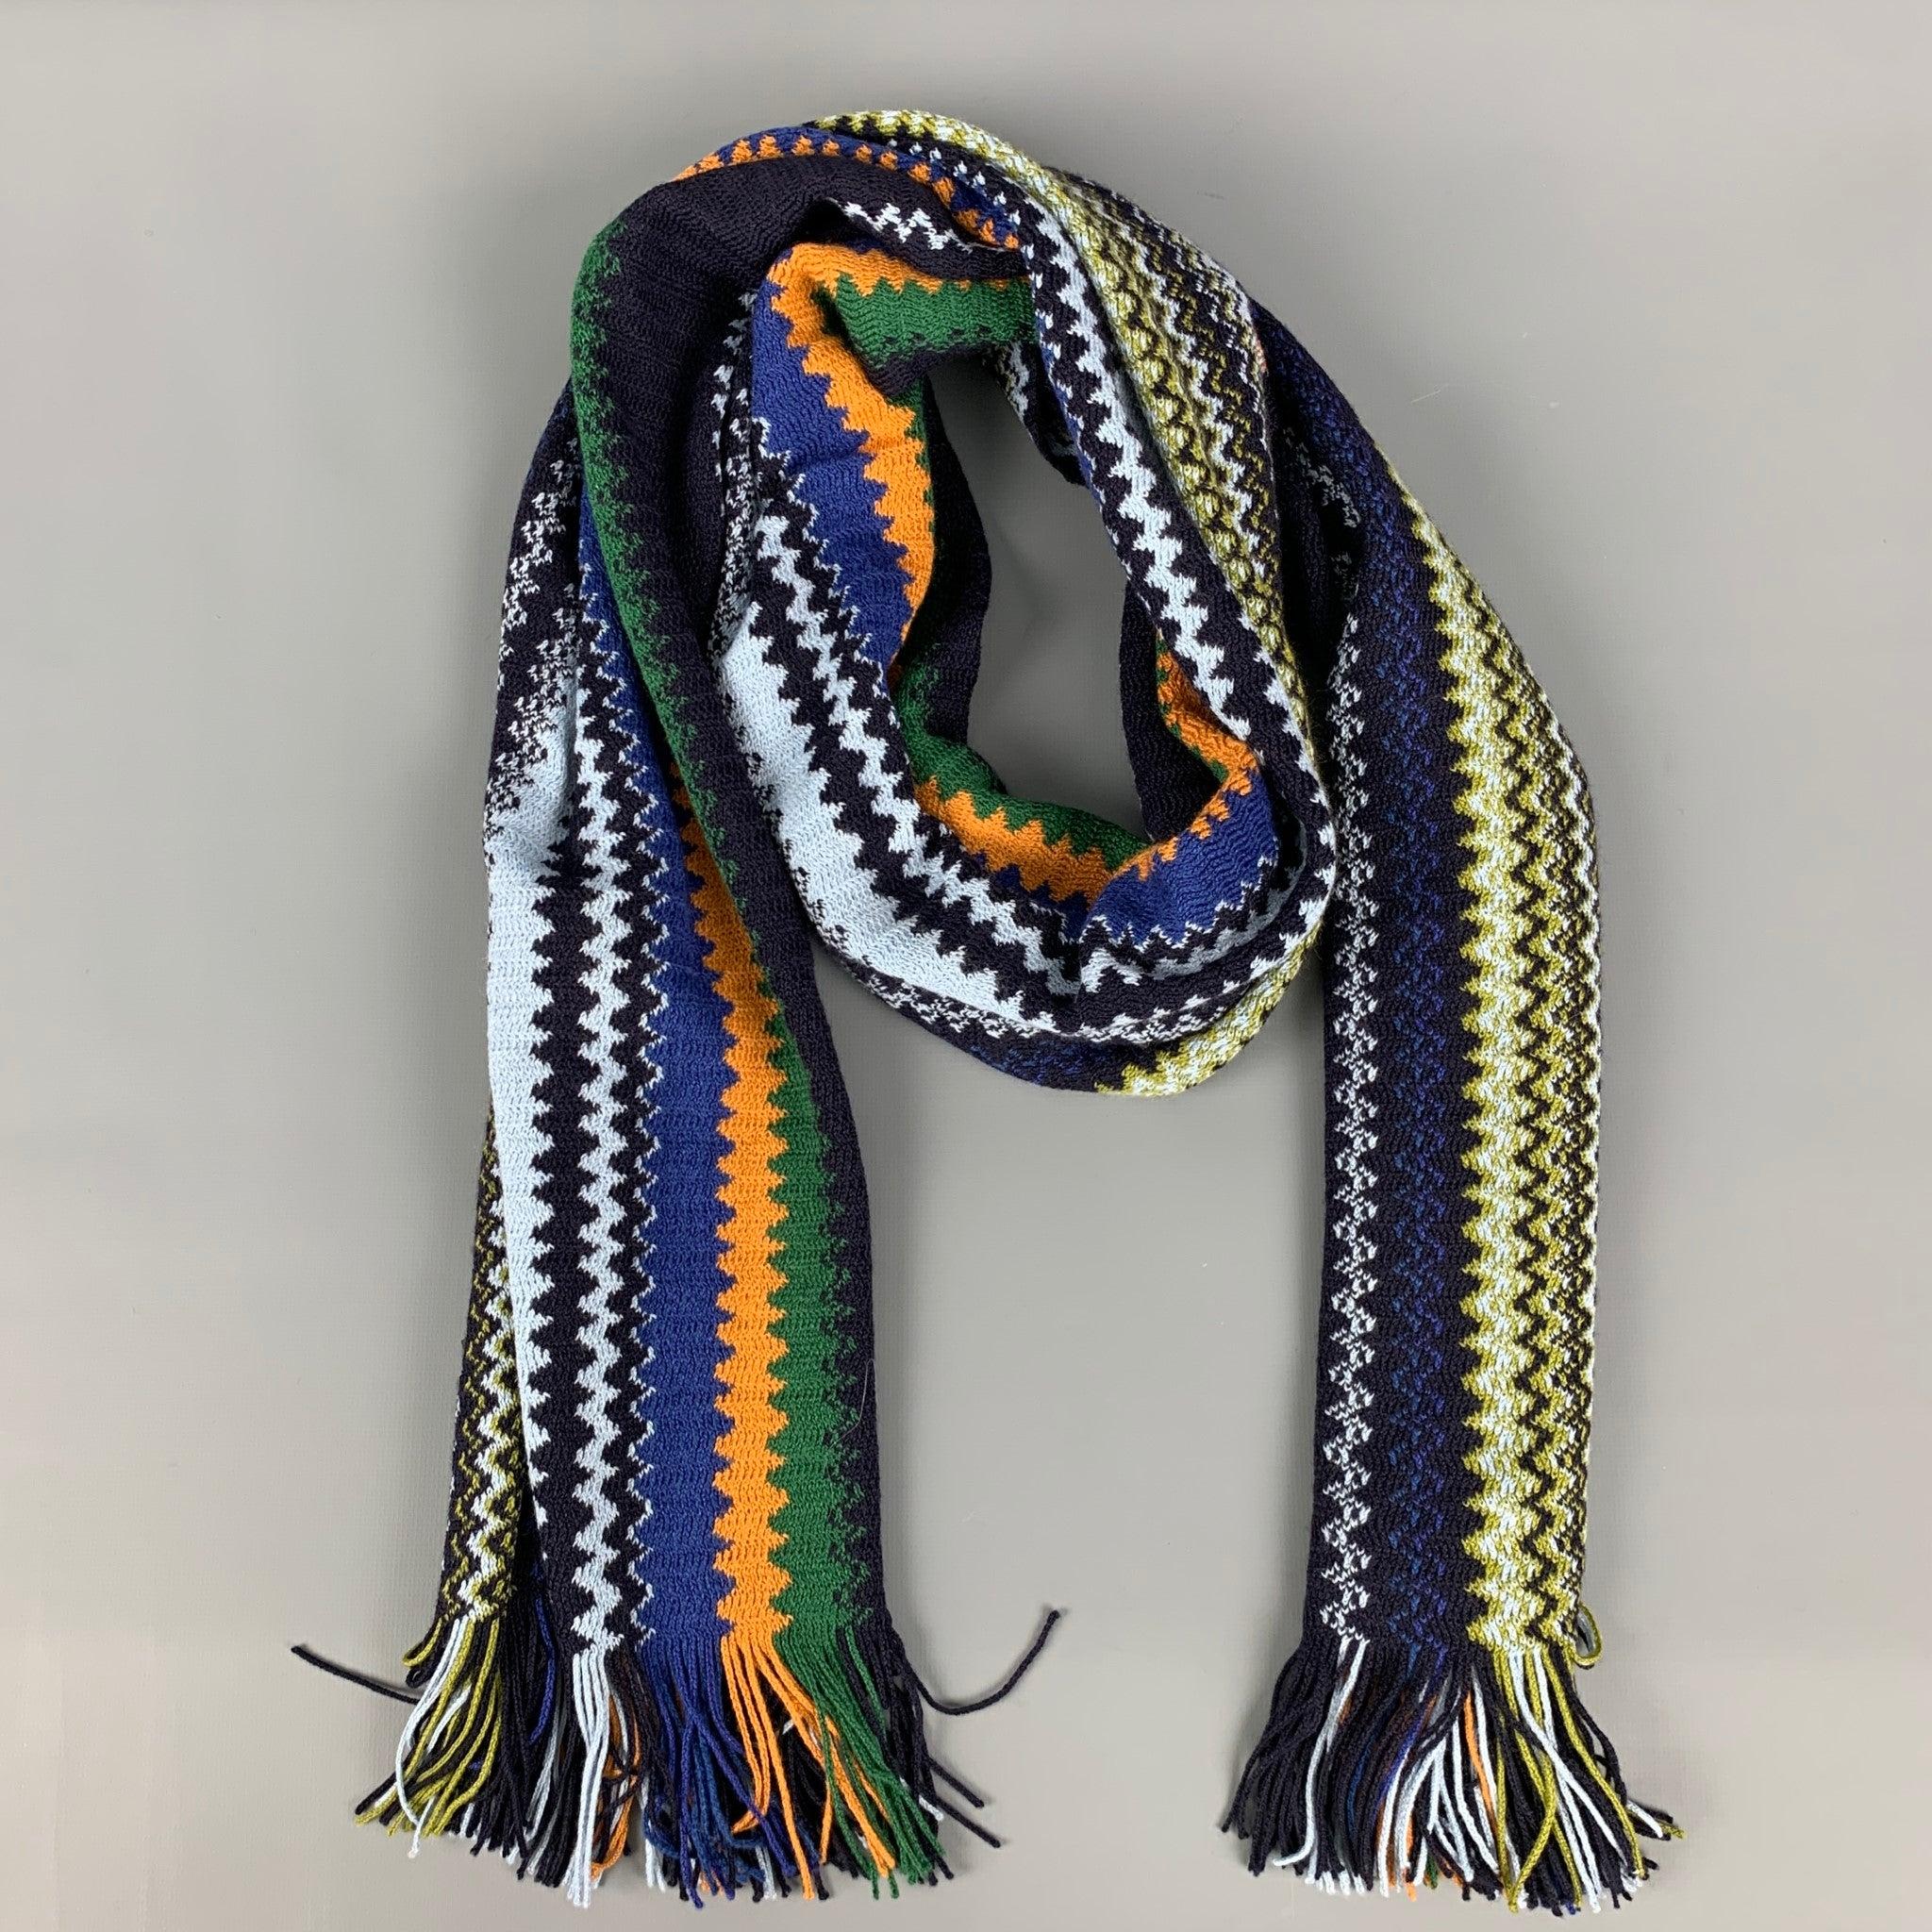 MISSONI Multi Color Zig Zag Wool Acrylic Knit Scarf In Excellent Condition For Sale In San Francisco, CA